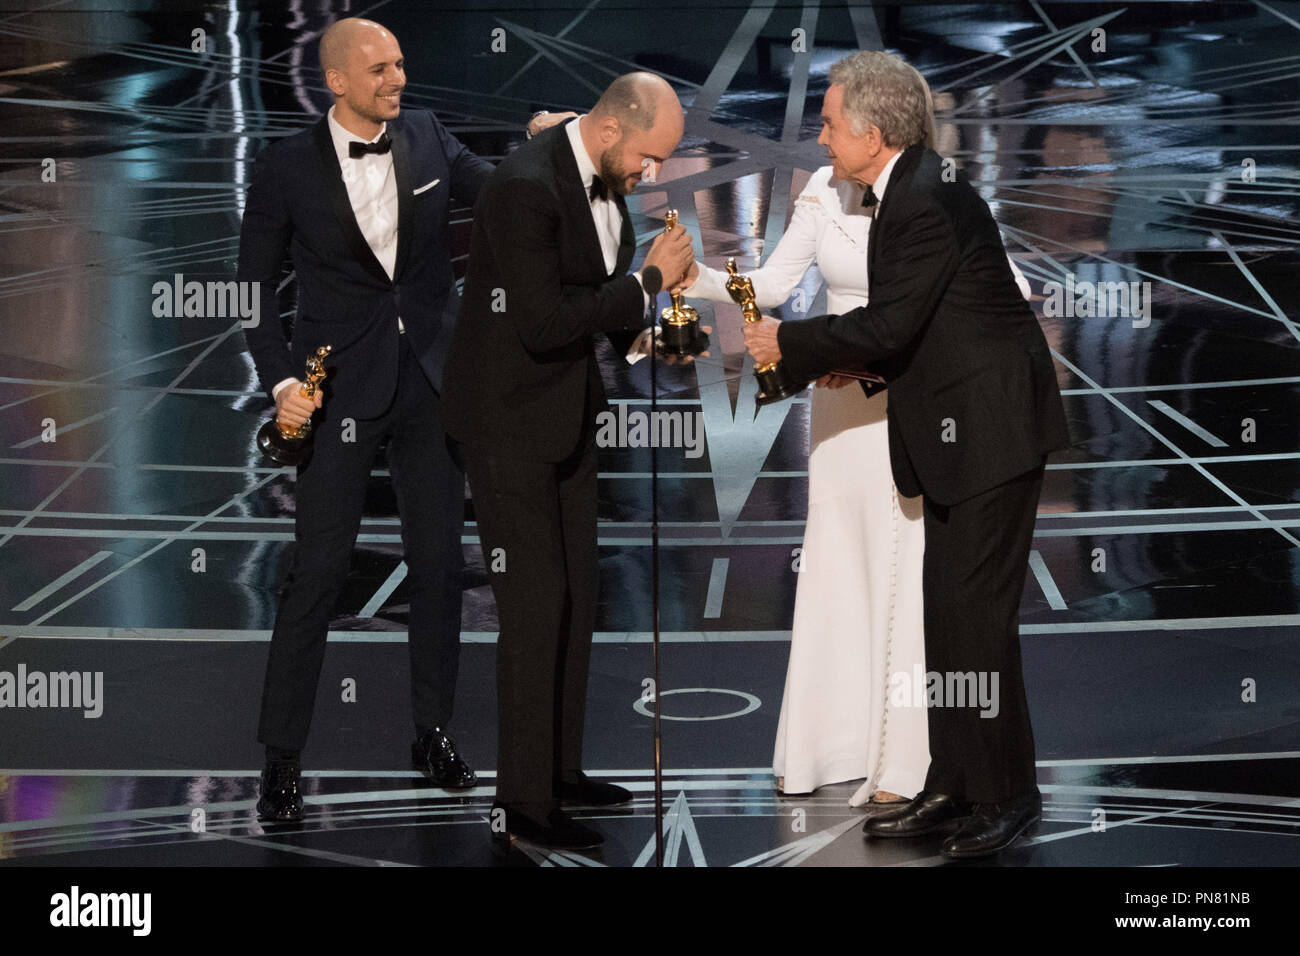 The cast of La La Land is mistakenly awarded the Oscar® for Best Picture from presenters Faye Dunaway and Warren Beatty during The 89th Oscars® at the Dolby® Theatre in Hollywood, CA on Sunday, February 26, 2017.  File Reference # 33242 484THA  For Editorial Use Only -  All Rights Reserved Stock Photo